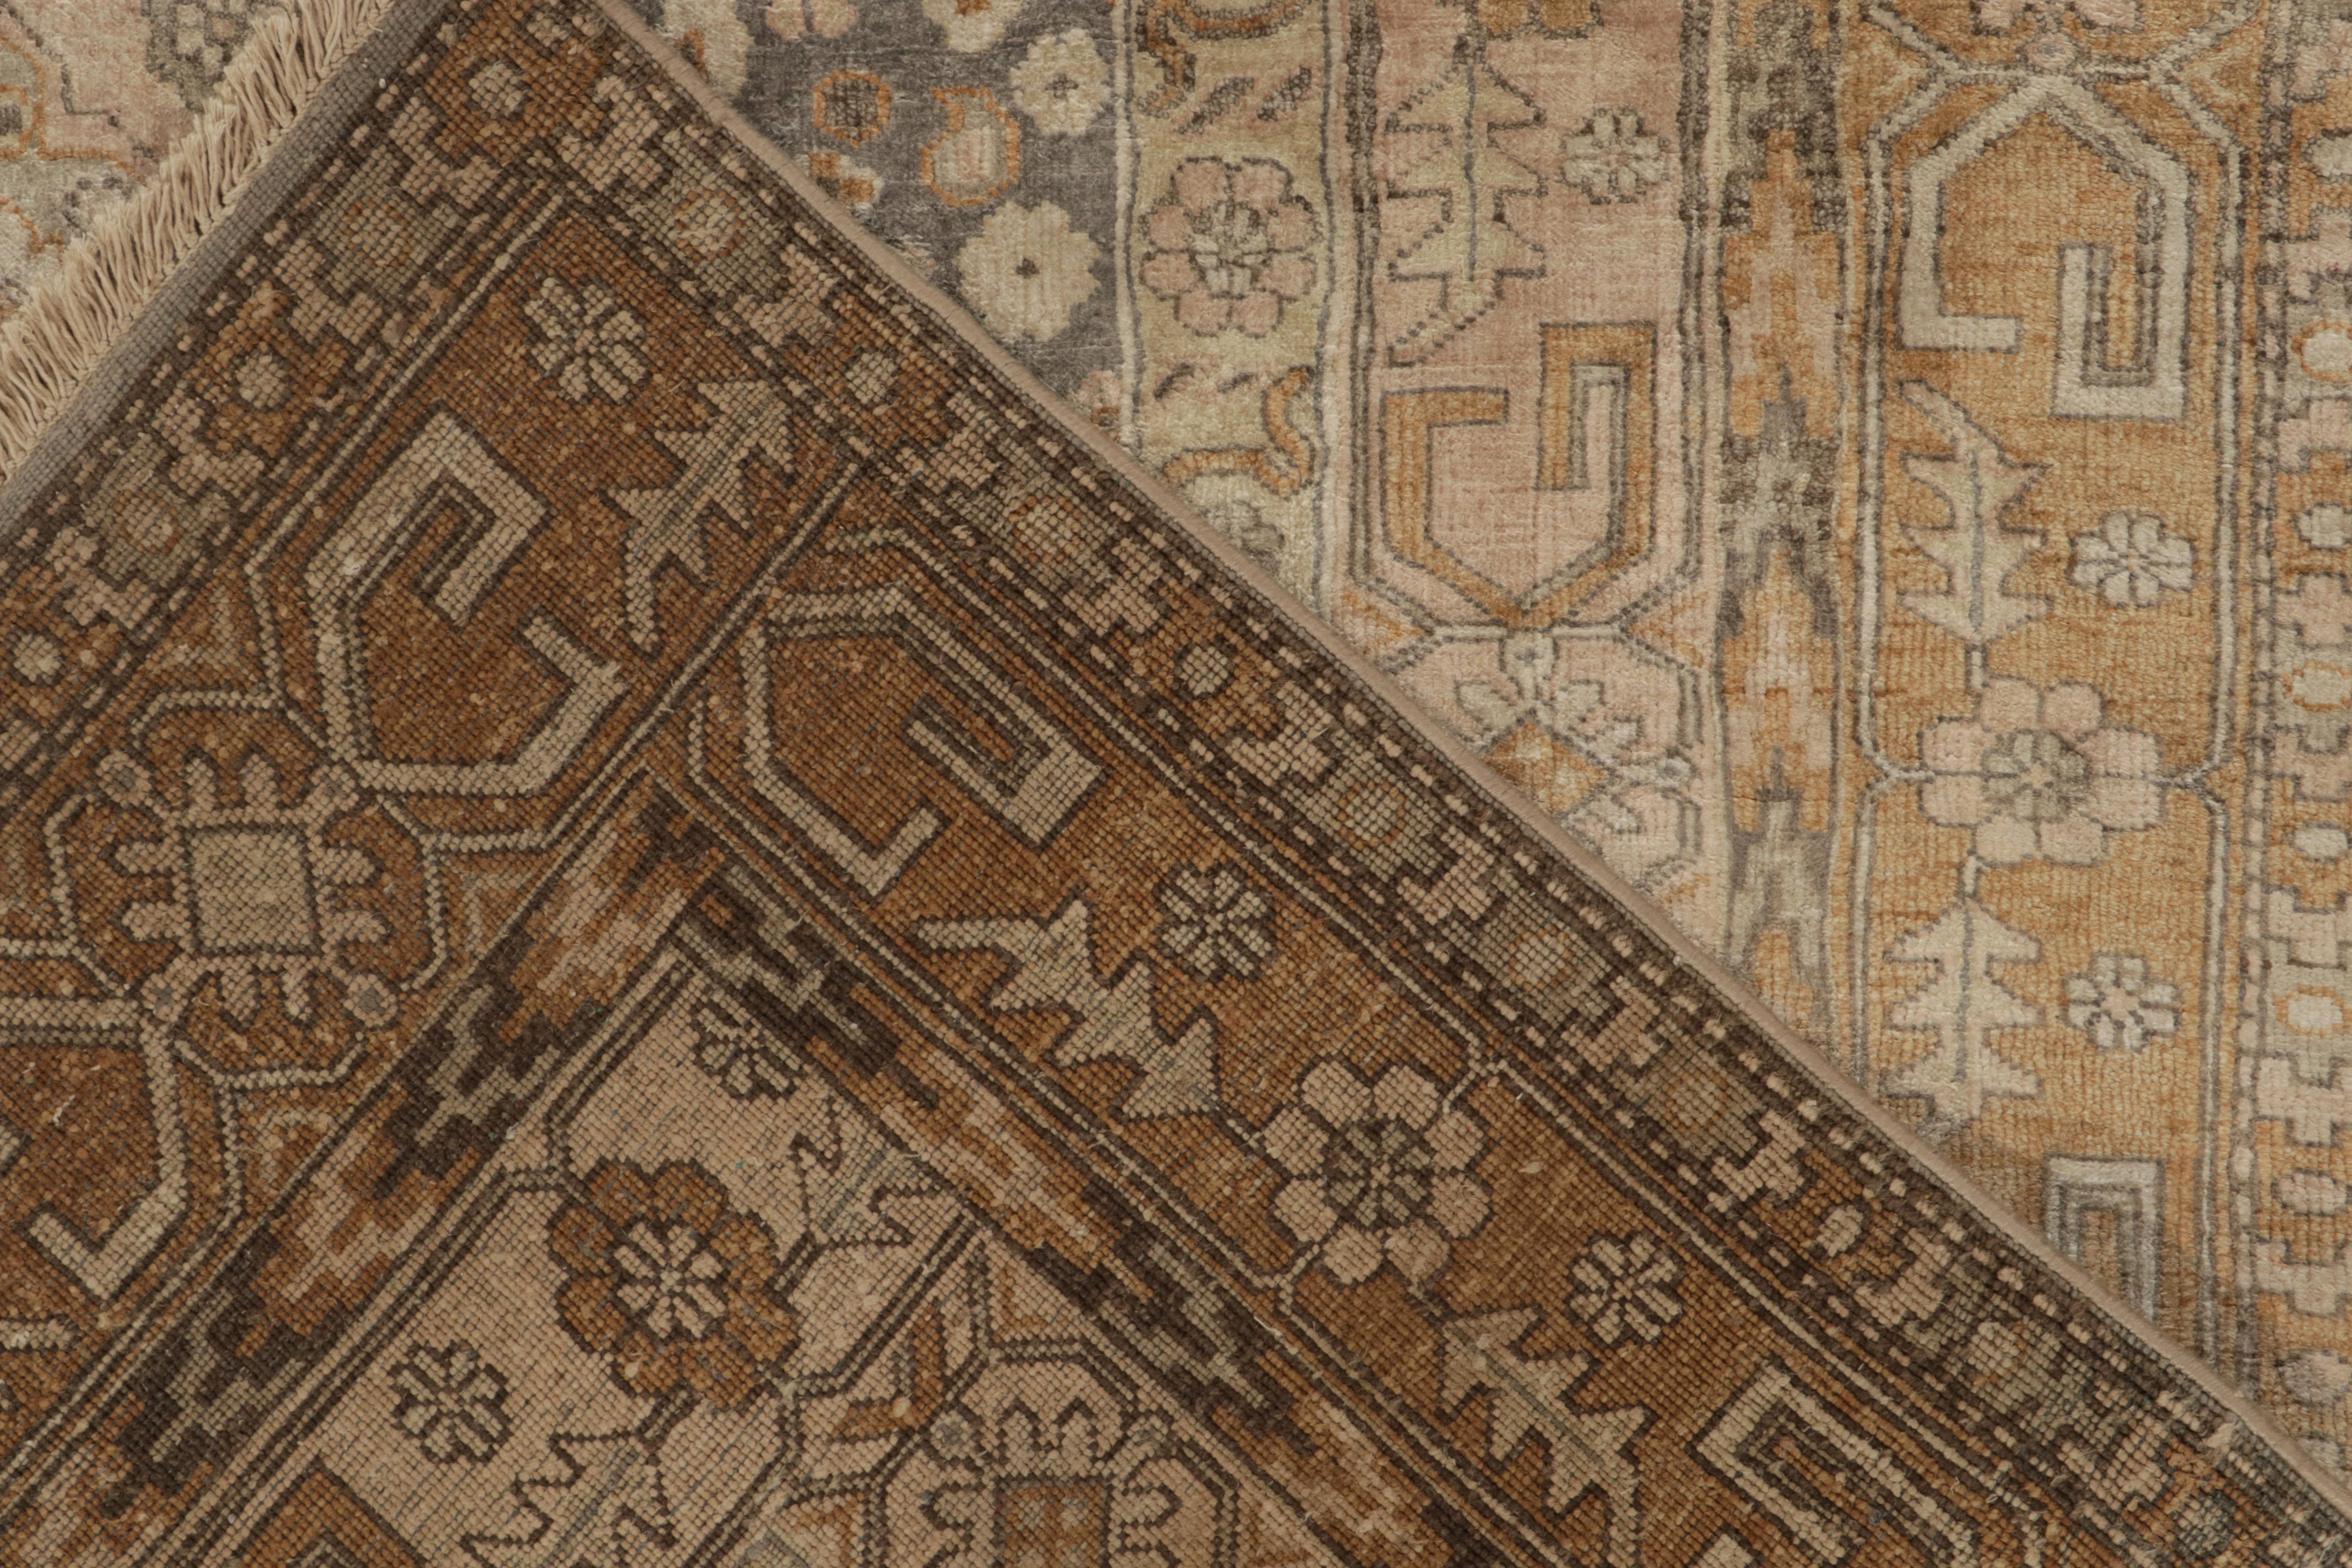 Silk Rug & Kilim’s Classic Khotan style rug in Beige & Gold Diamonds, Floral Patterns For Sale